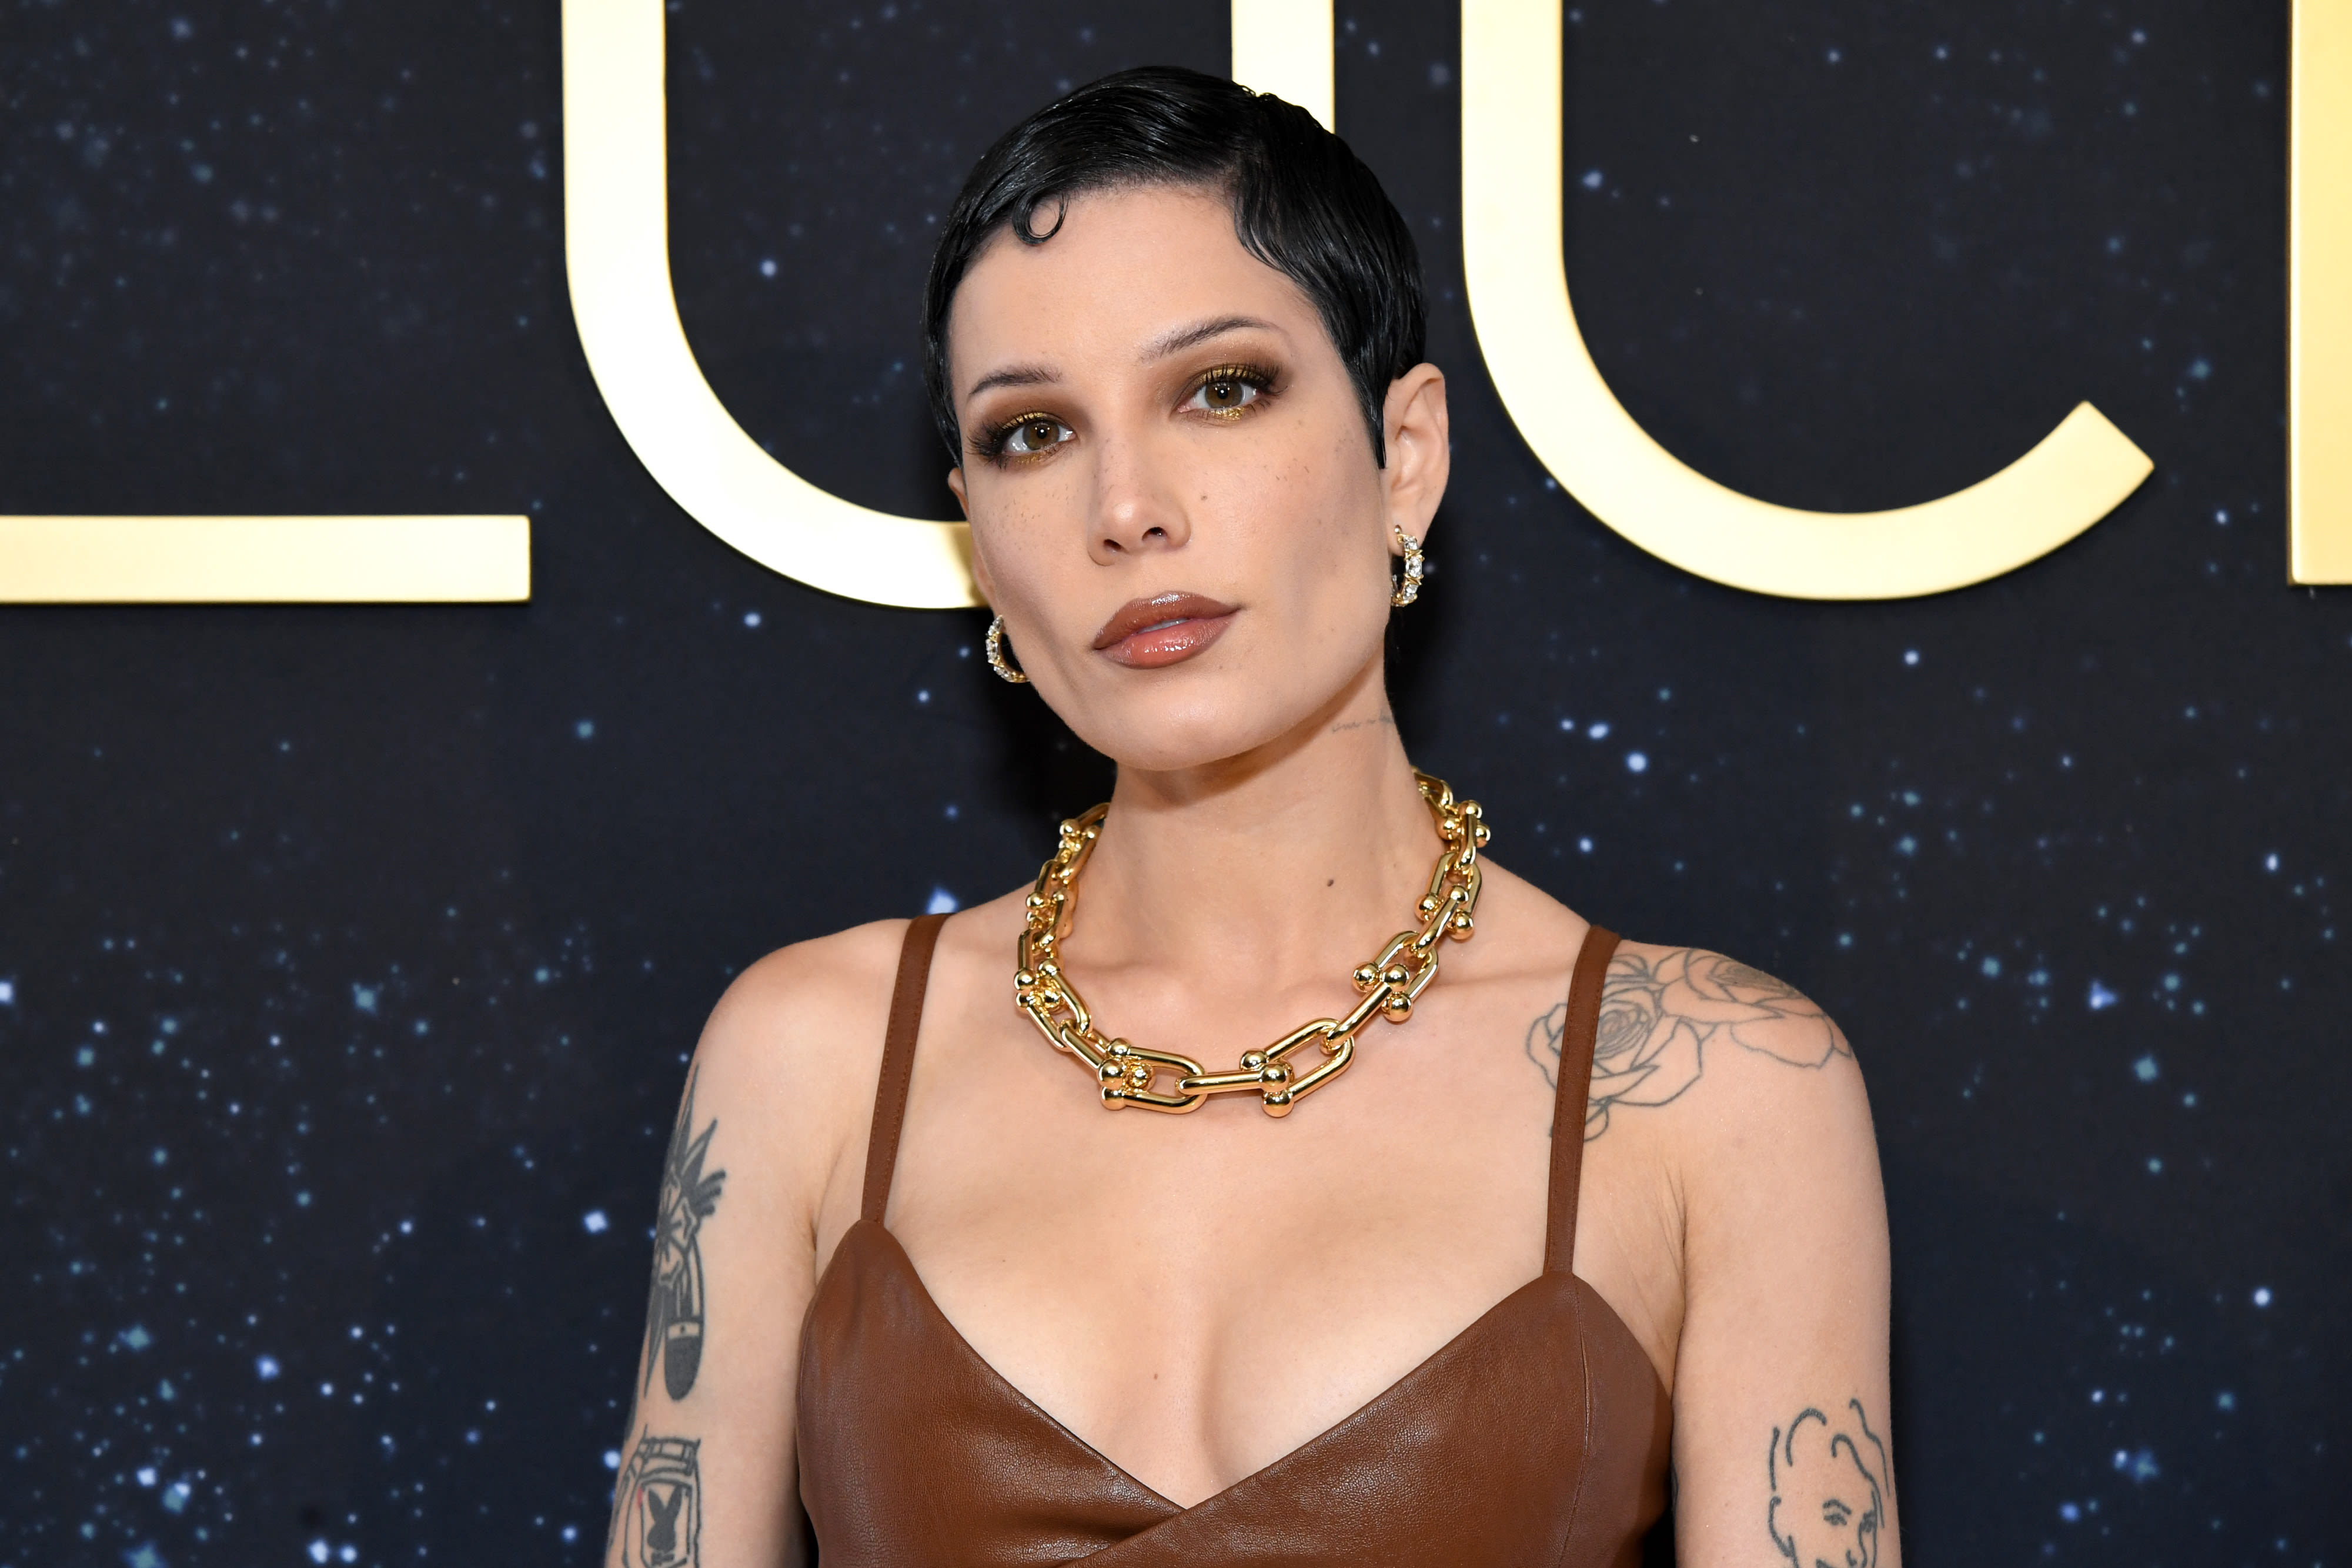 Halsey Gears Up for Fifth Album With New Single ‘The End,’ Revealing Serious Health Struggles: ‘Lucky to Be Alive’